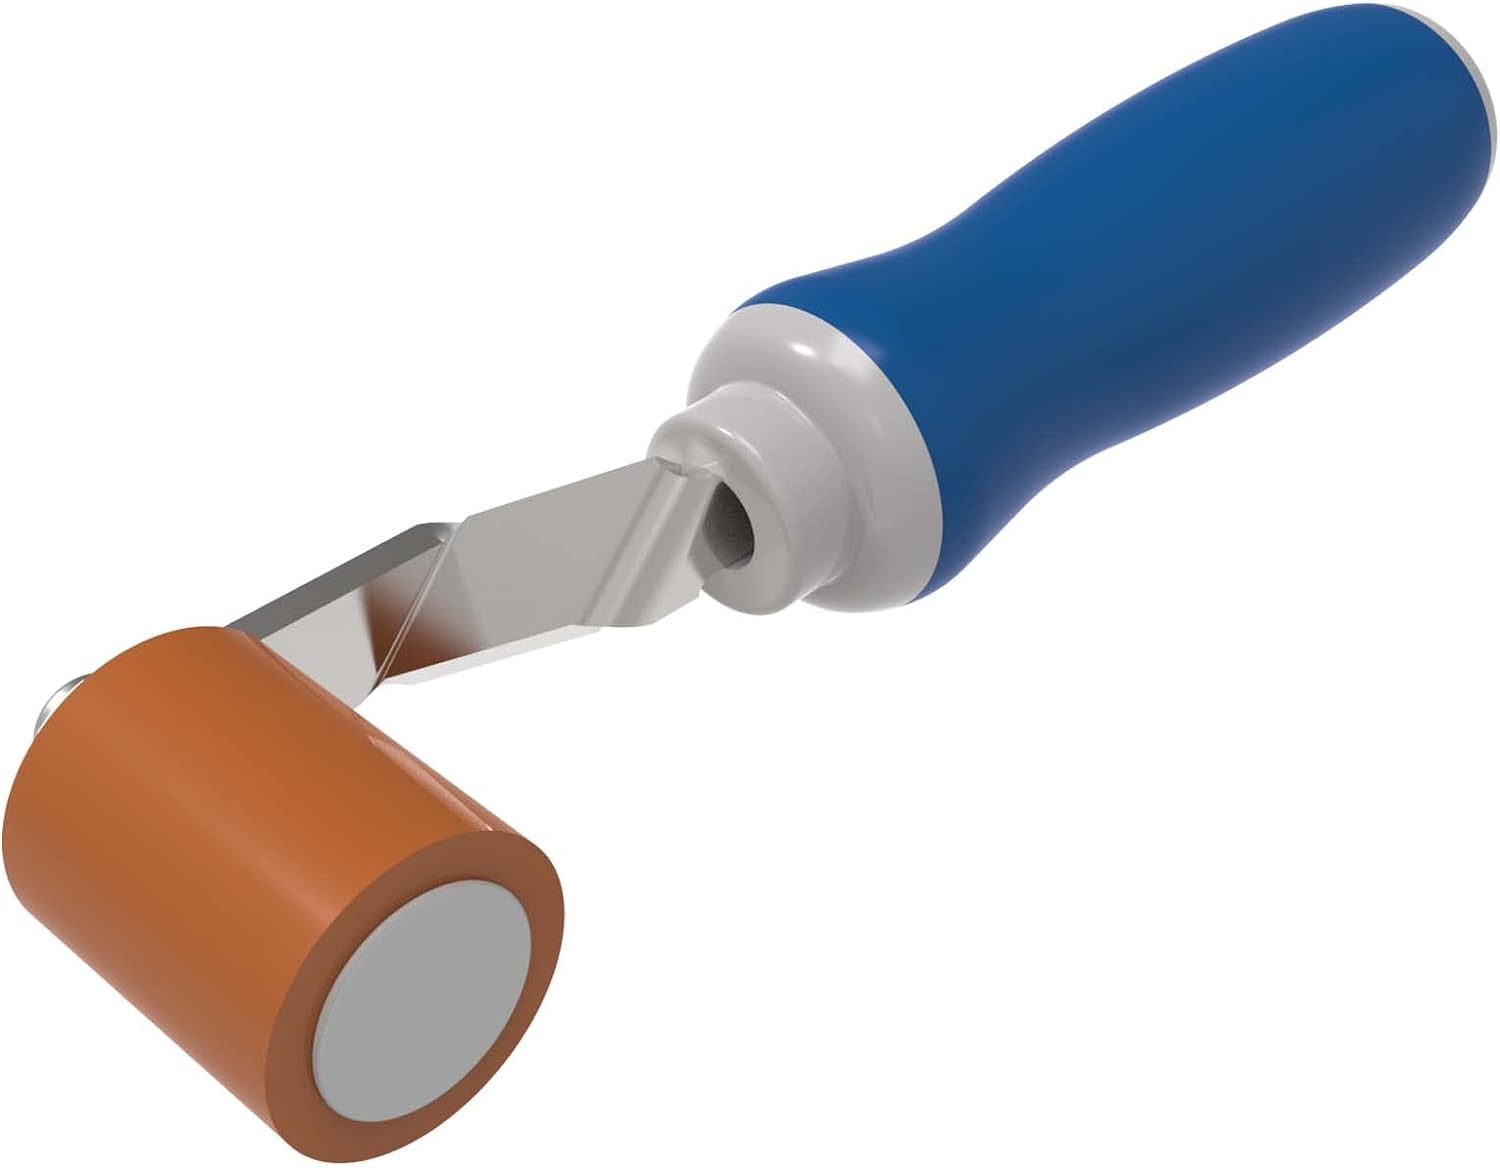 Everhard Convertible Seam Roller | 1-3/4"X 1-7/16" Single Angle Offset Silicone Roller | Ergonomic Right Handed Handle